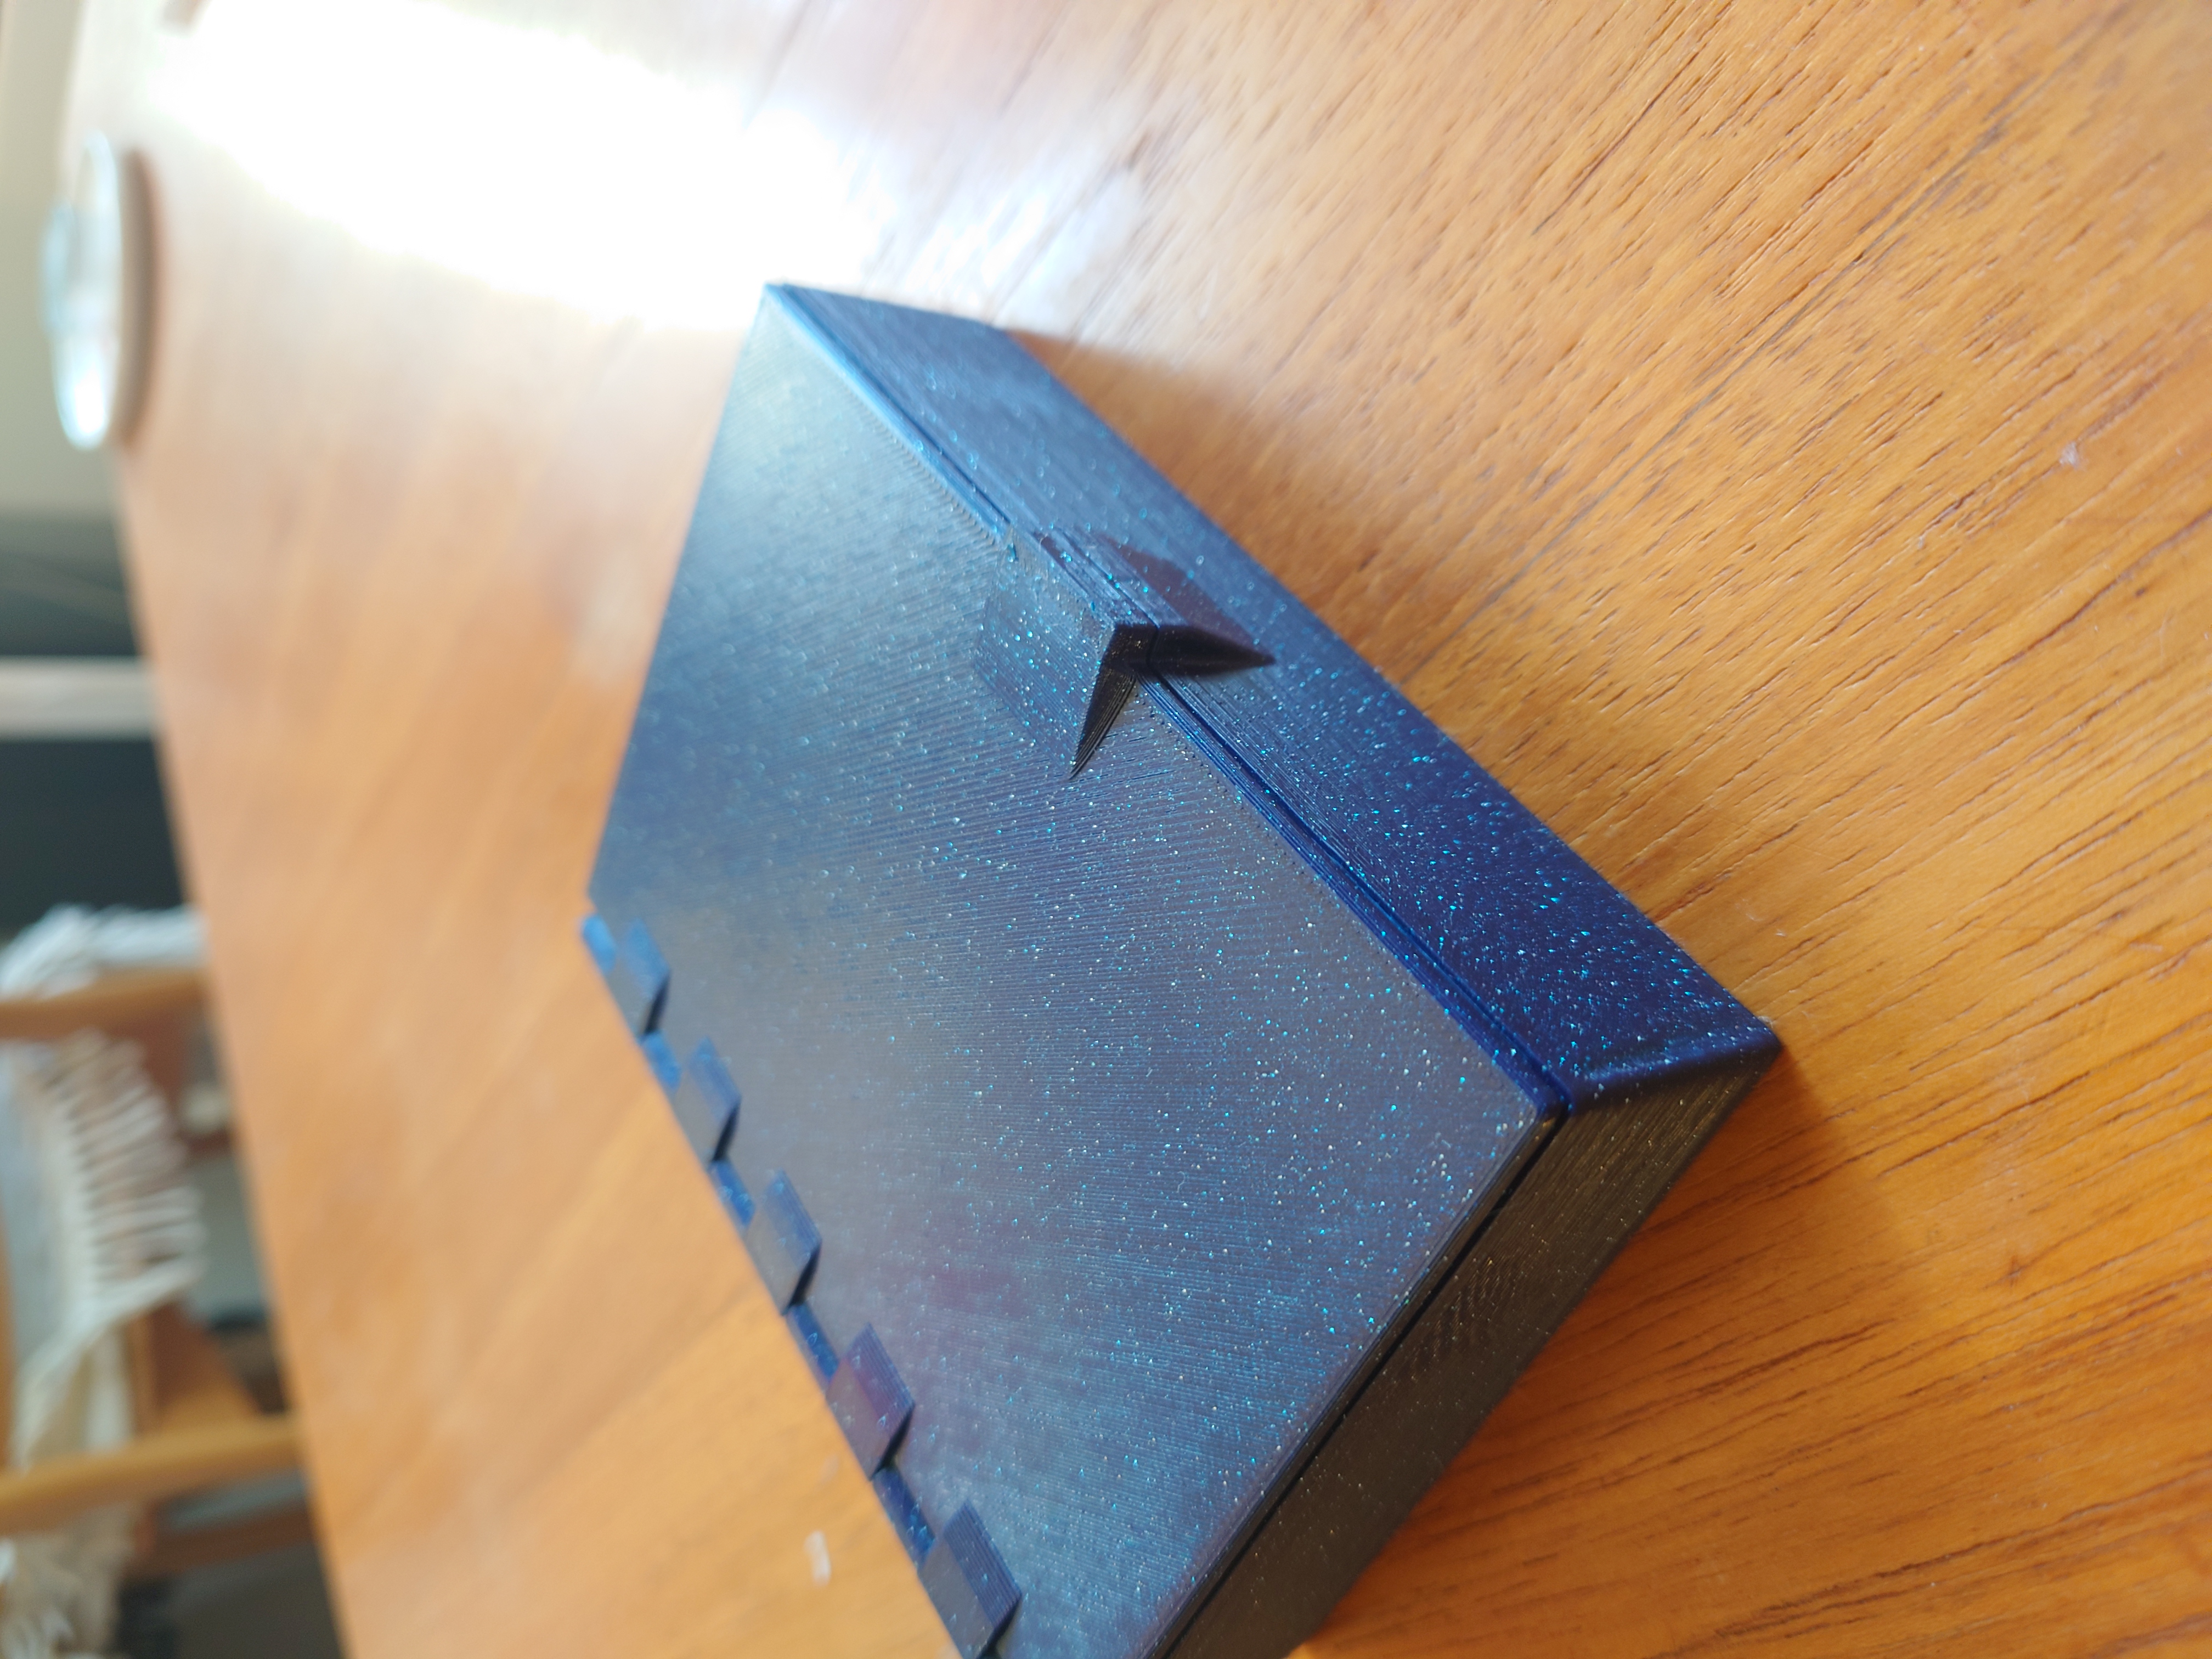 Generic box with hinge and magnets